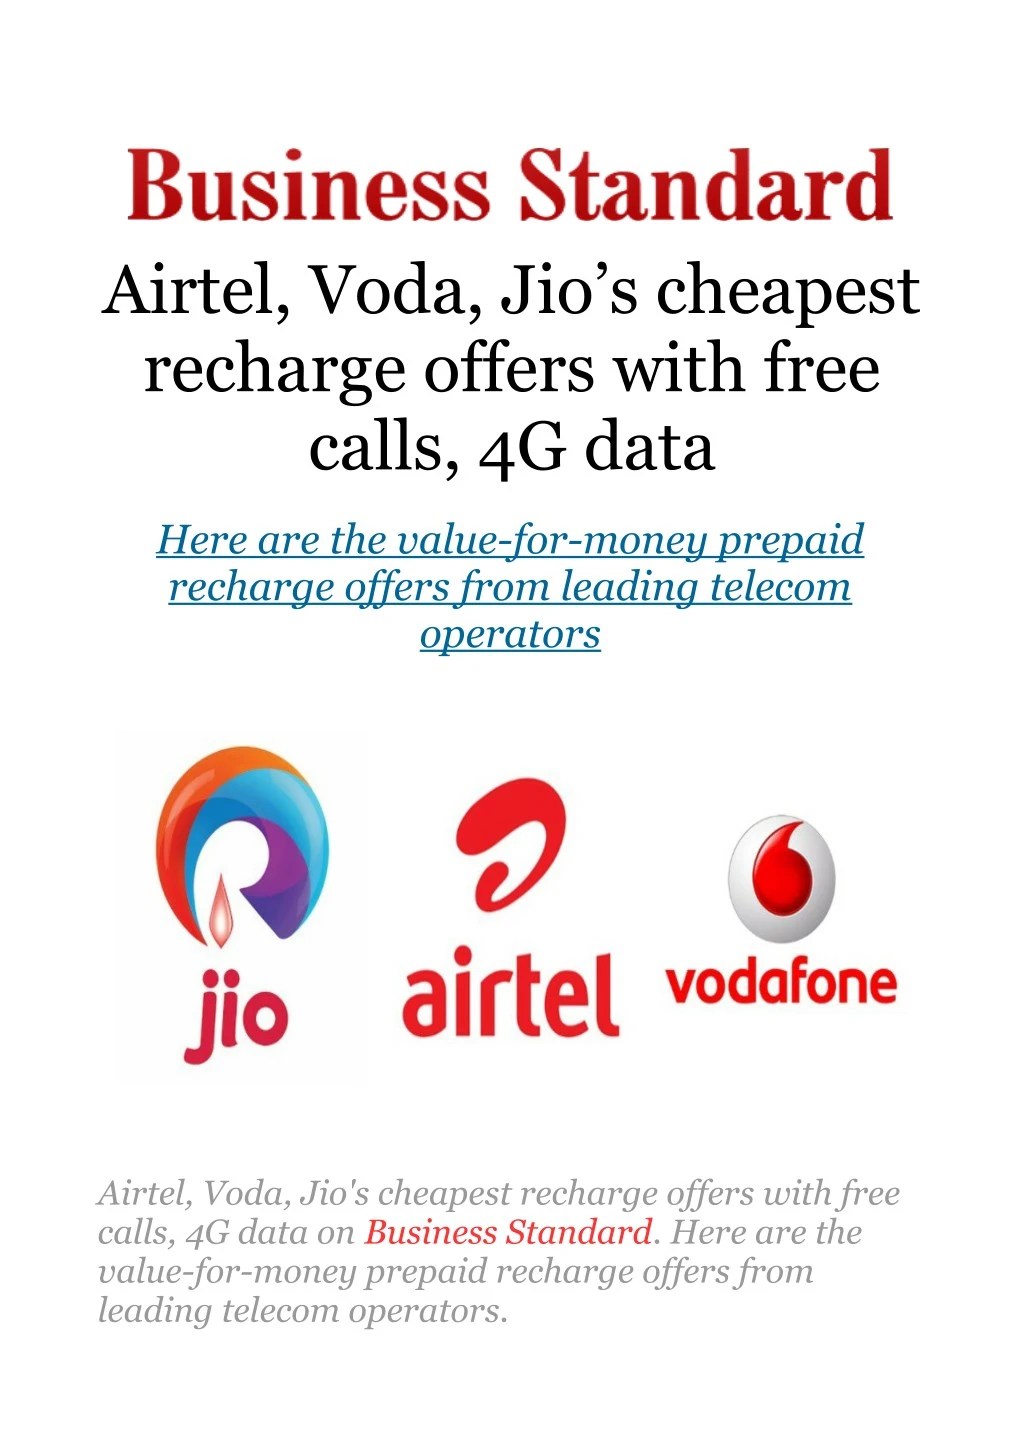 airtel voda jio s cheapest recharge offers with